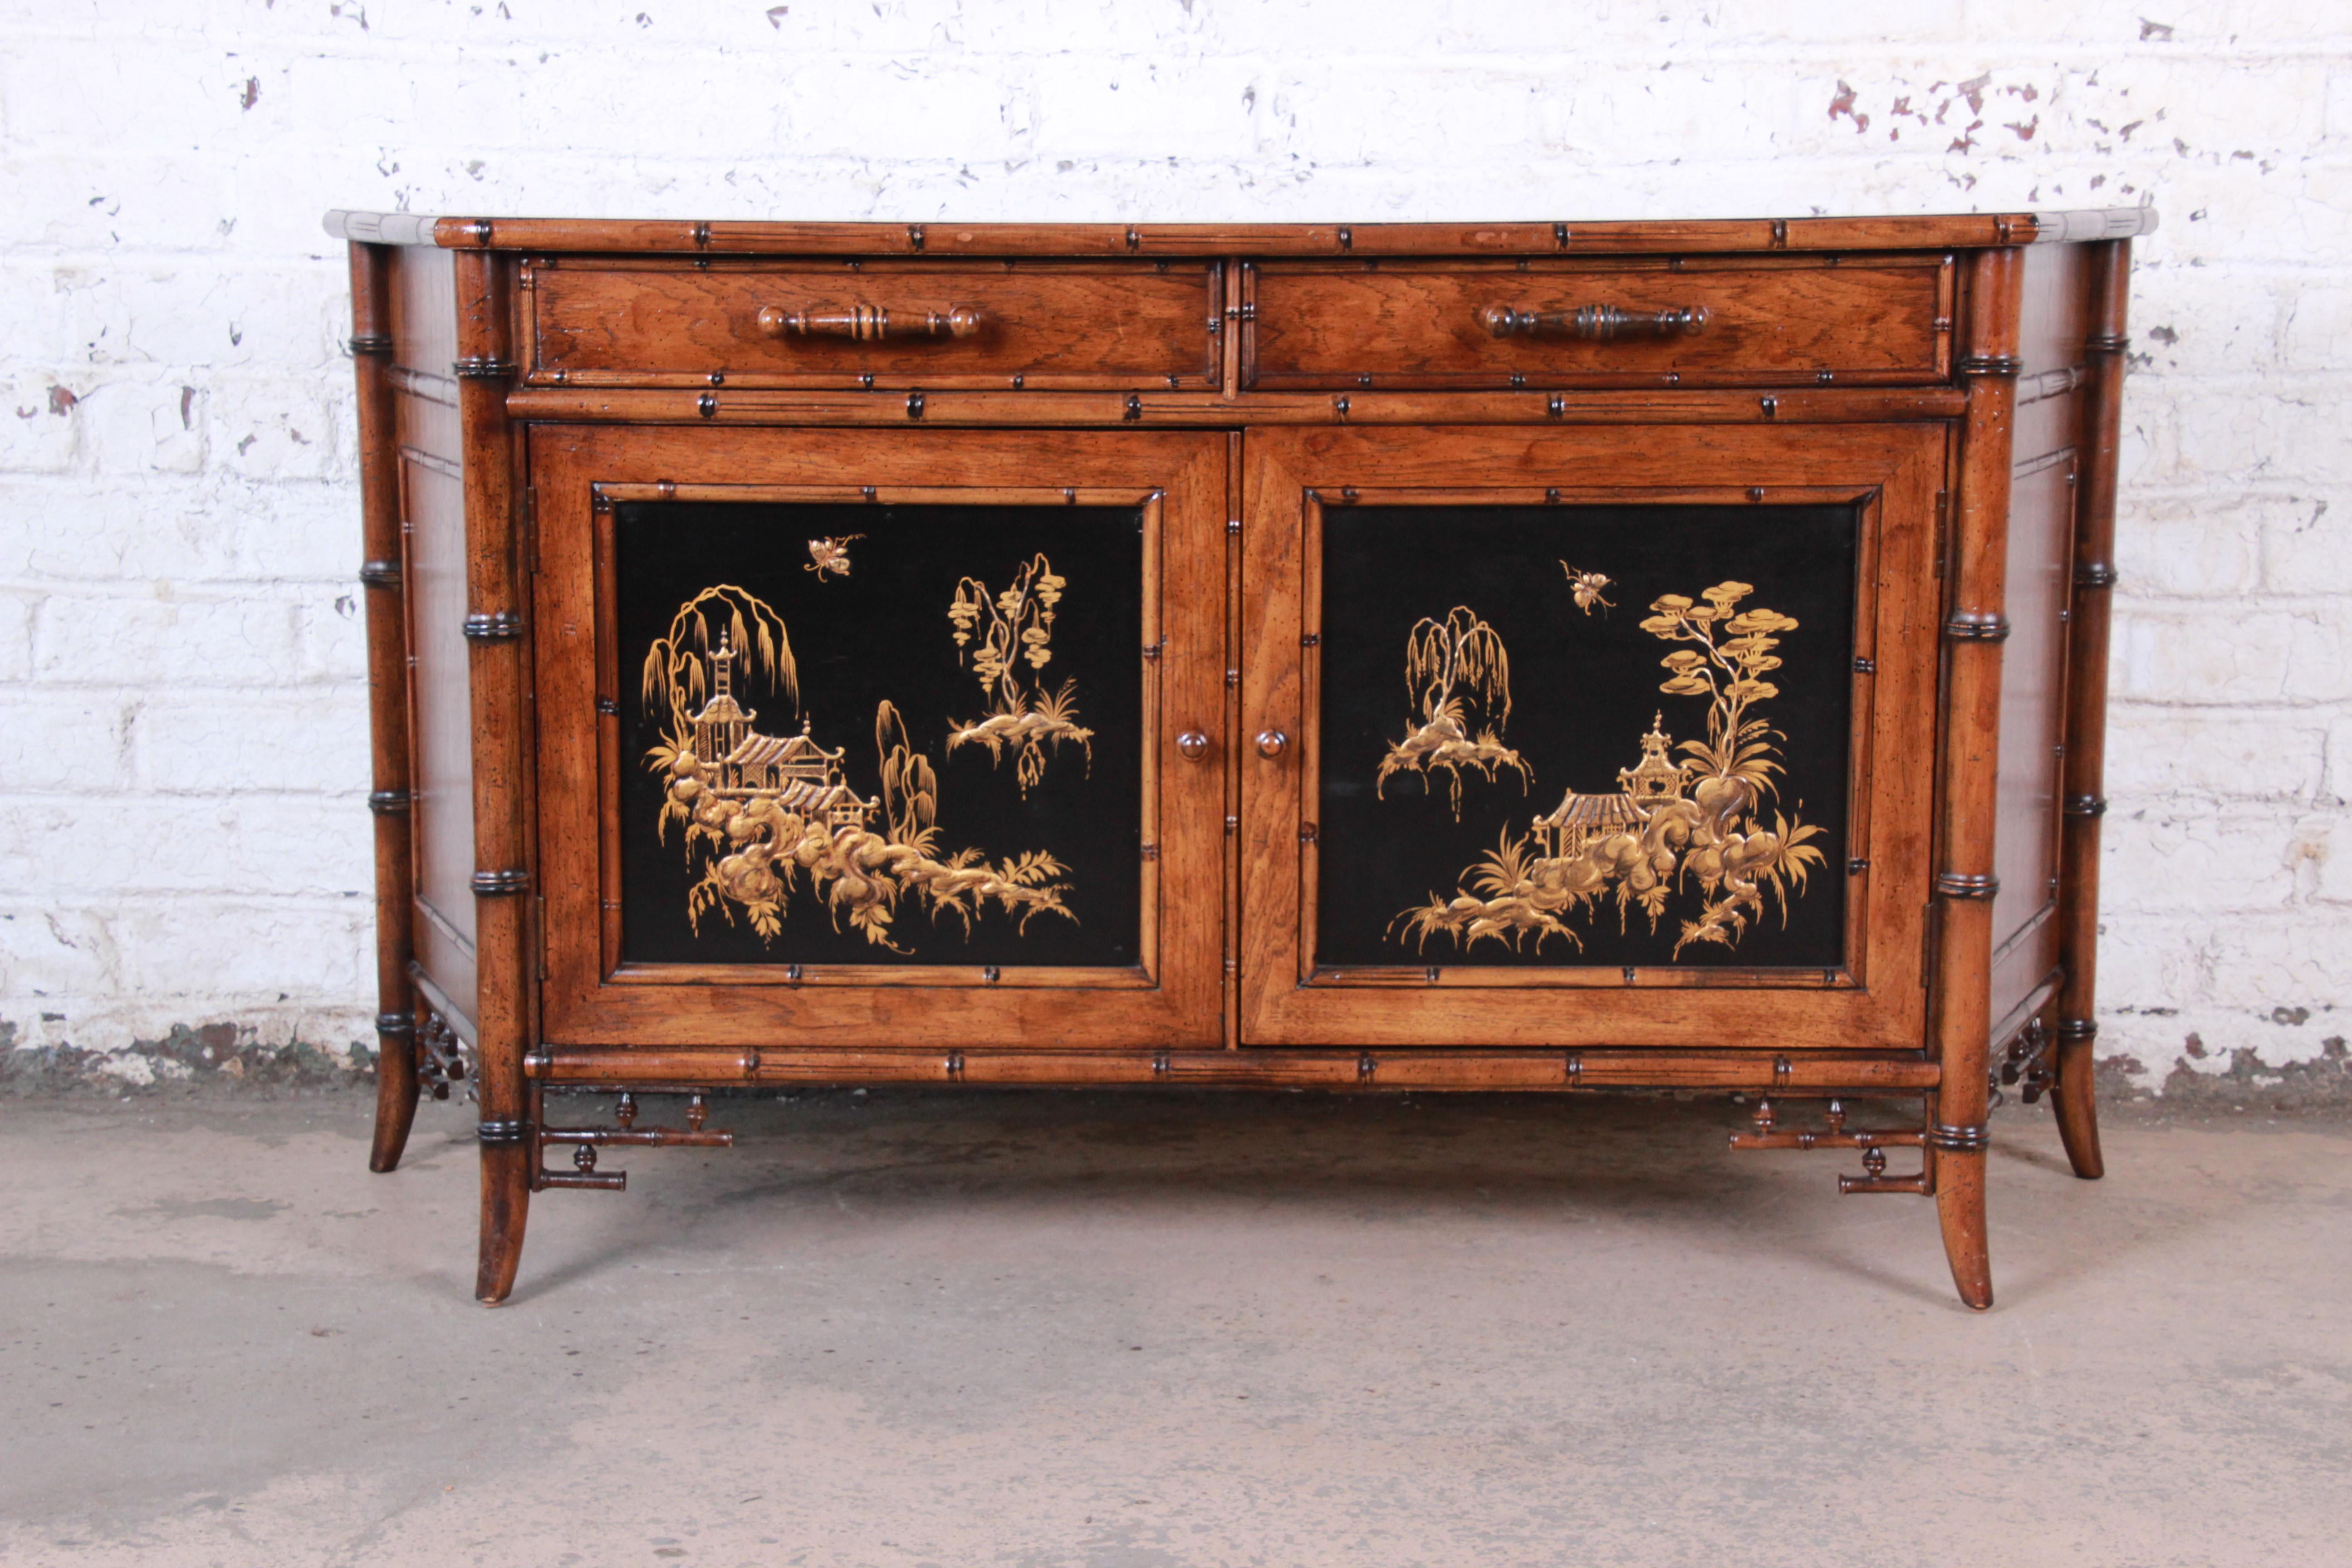 An exceptional midcentury Hollywood Regency chinoiserie faux bamboo credenza

Made by Century Furniture

Italy, circa 1970s

Walnut + faux bamboo + figurative Asian nature scenes

Measures: 61.25